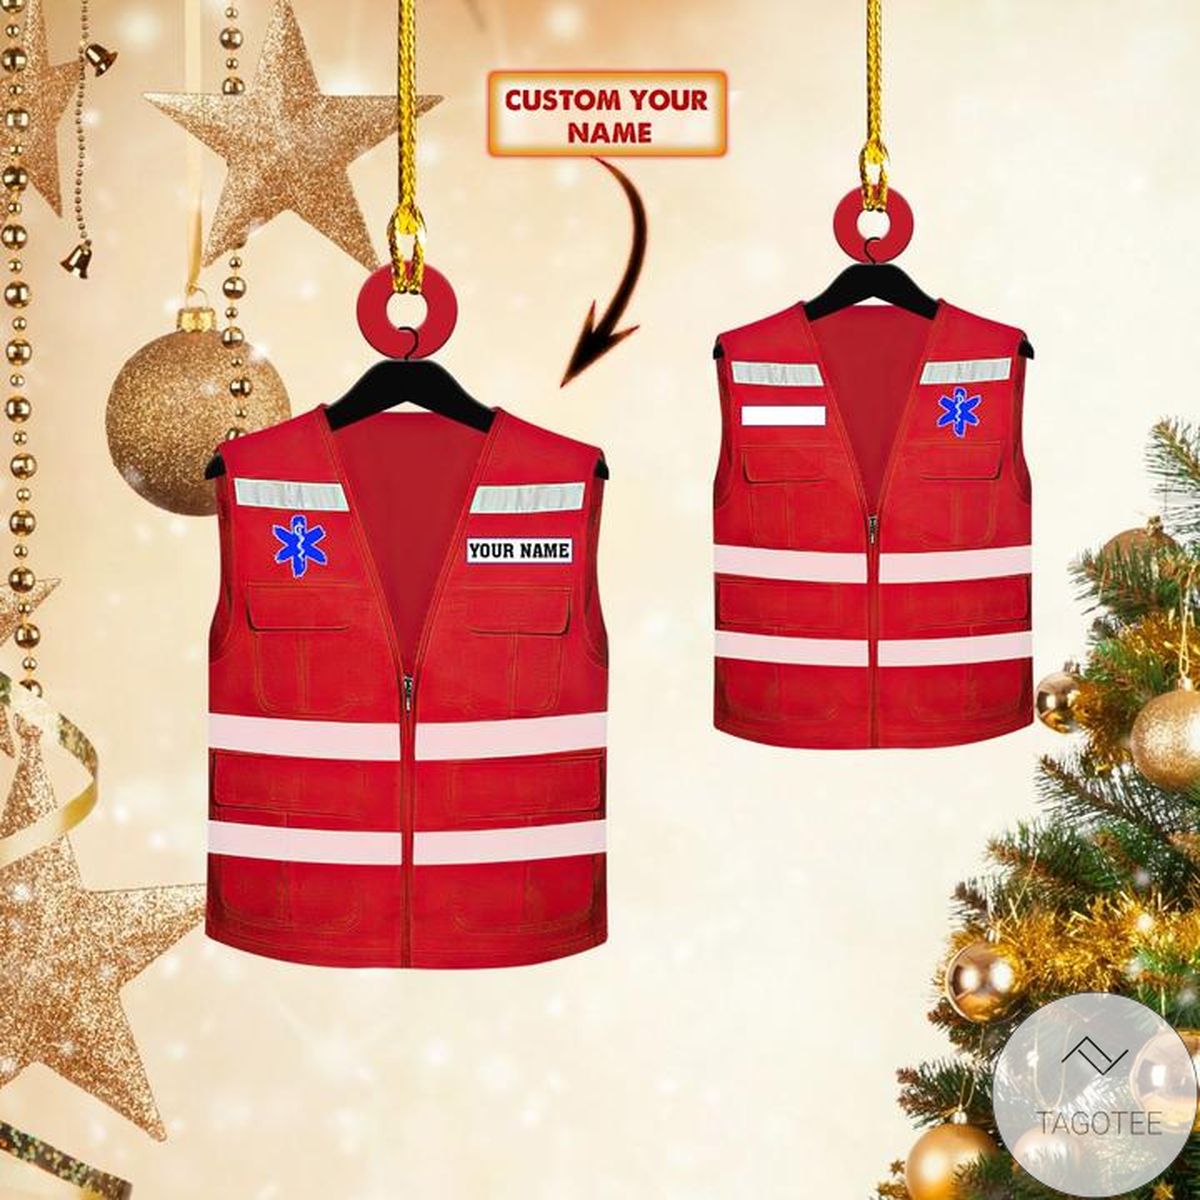 Personalized Waistcoat Emt Paramedic Ornament Red Shaped Ornament